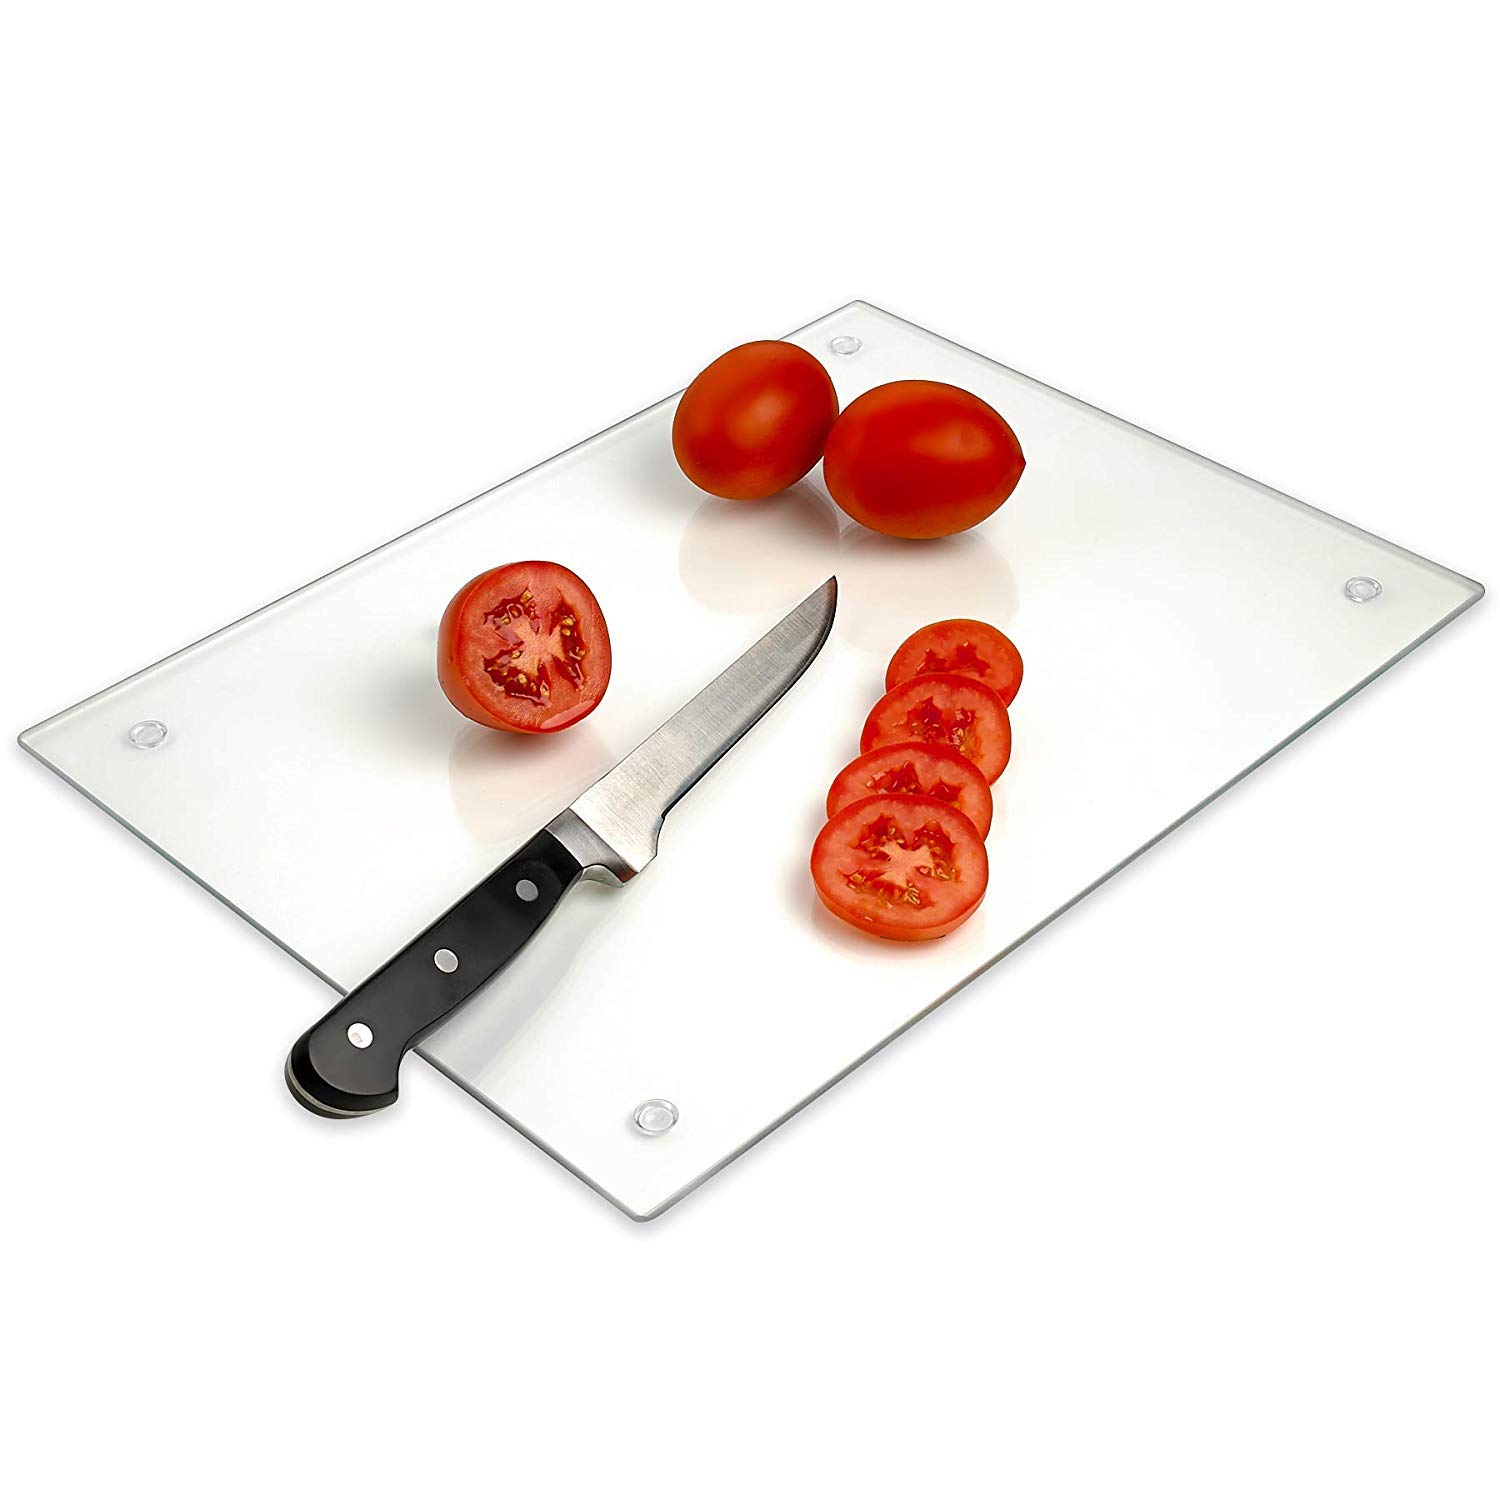 Tempered Glass Cutting Board – Long Lasting Clear Glass – Scratch Resistant, Heat Resistant, Shatter Resistant, Dishwasher Safe. (XLarge 16x20")